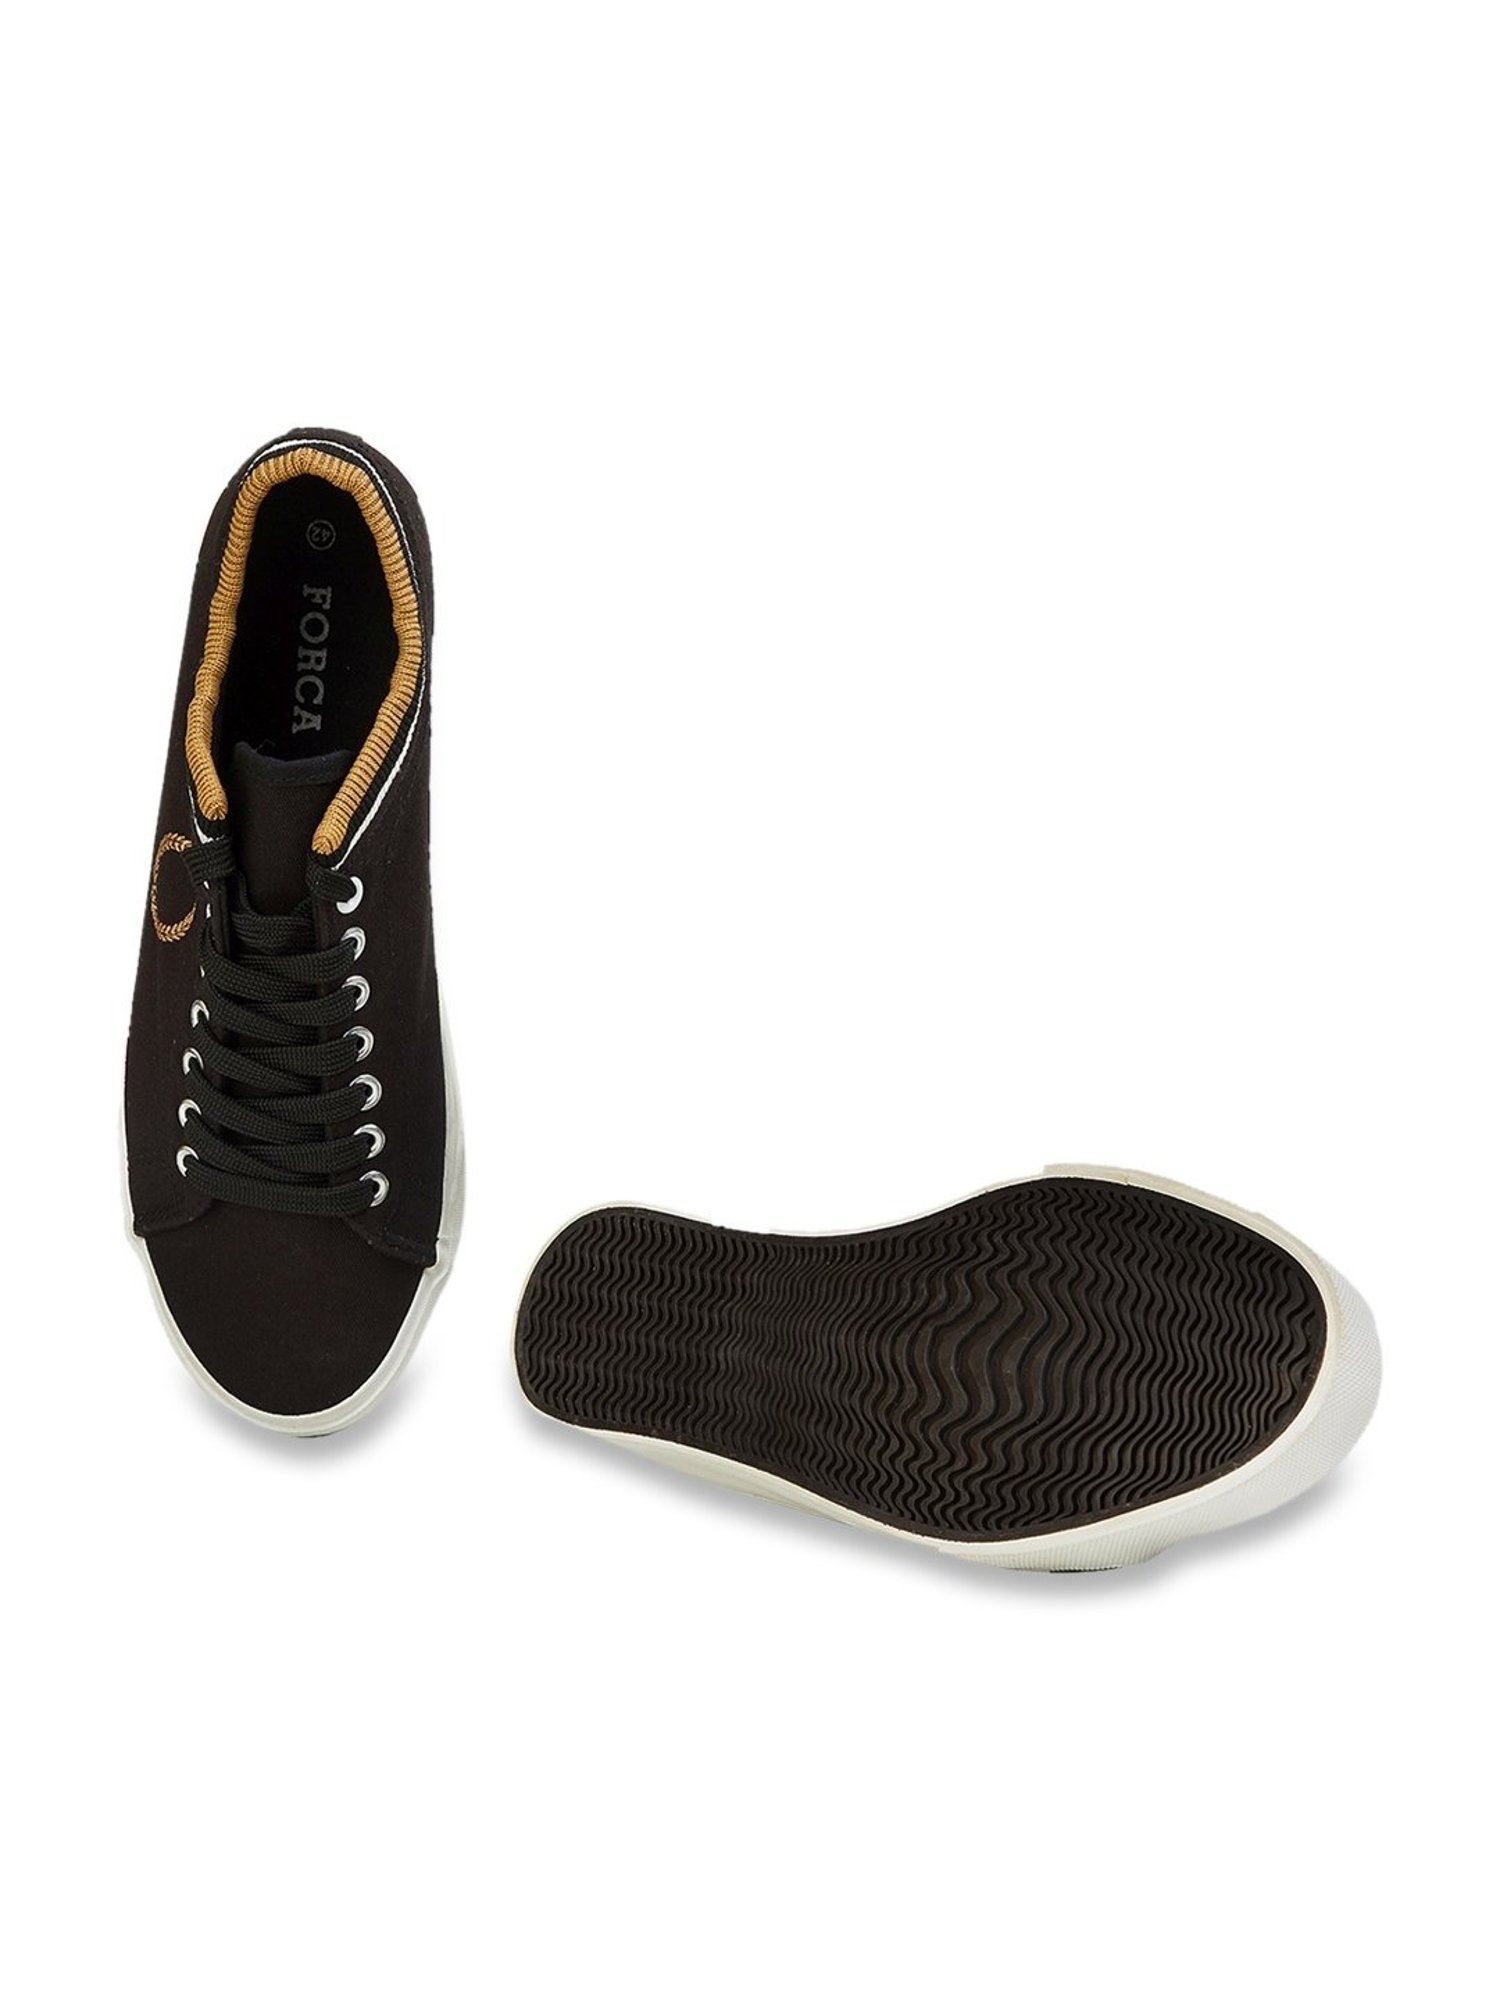 Forca Slip On Shoes - Buy Forca Slip On Shoes online in India